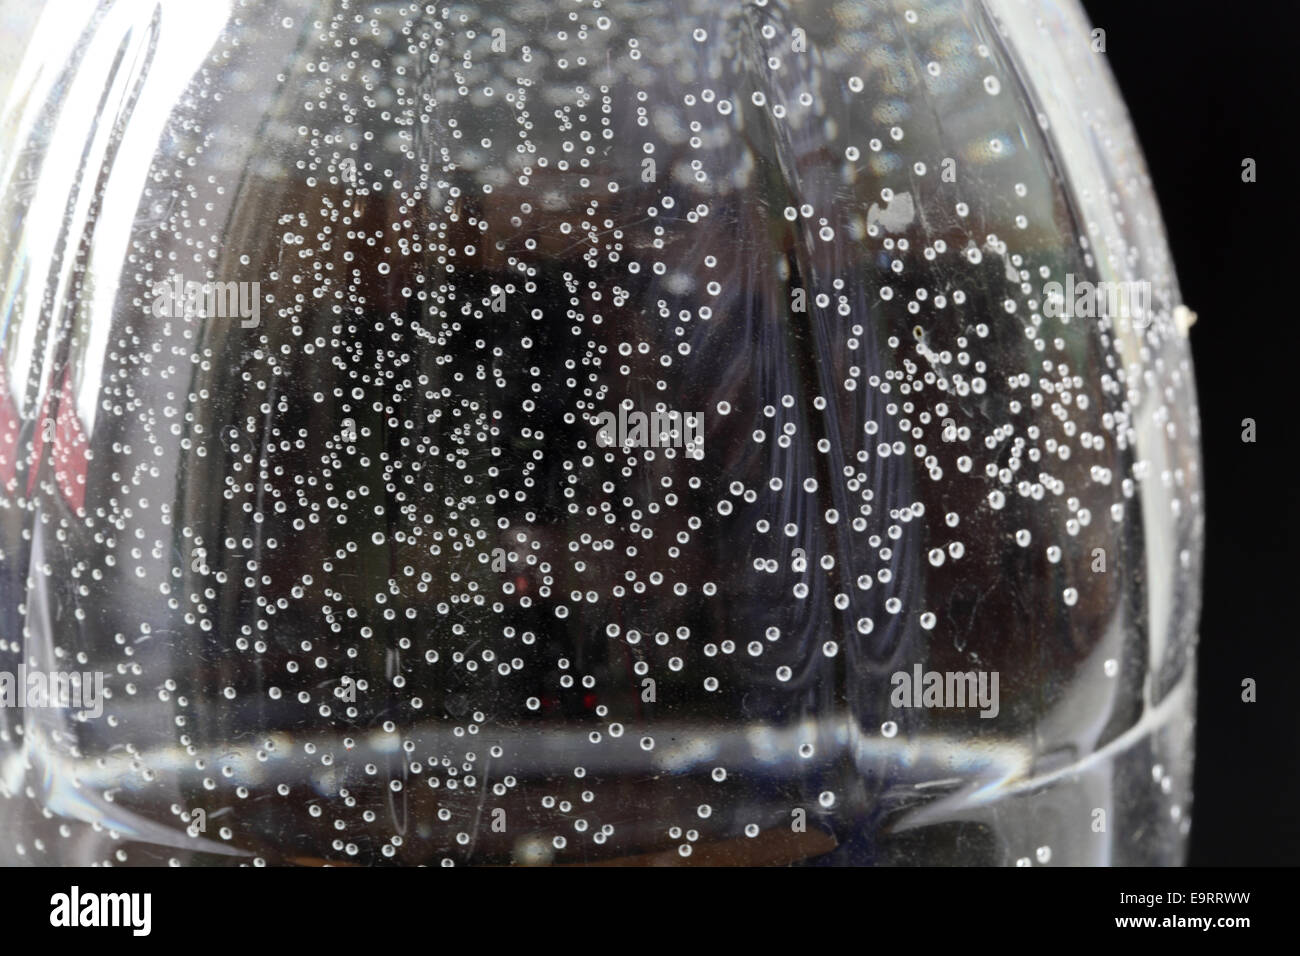 plastic bottle of water and bubbles Stock Photo